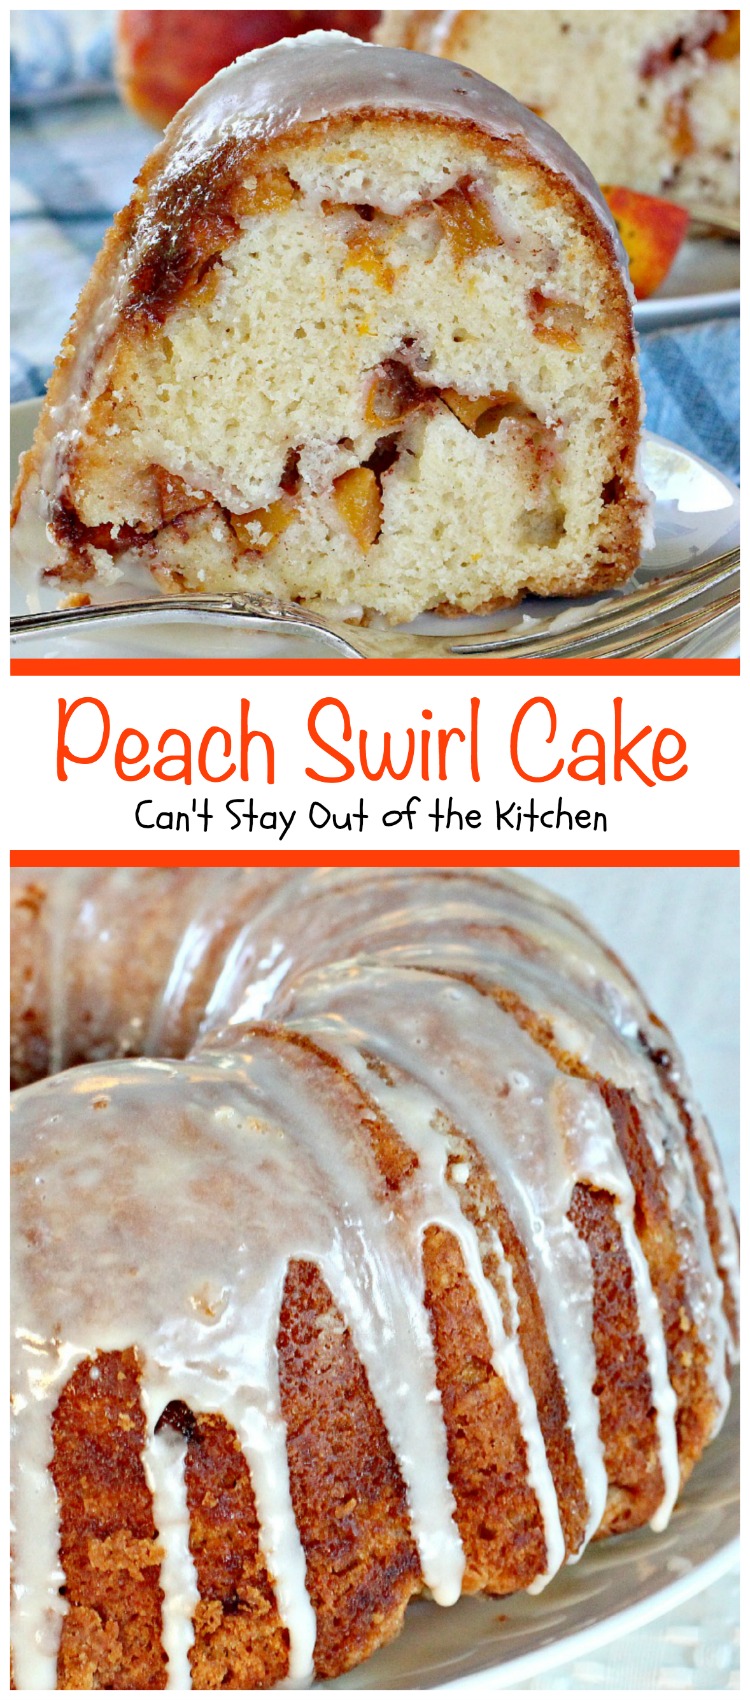 Peach Swirl Cake | Can't Stay Out of the Kitchen